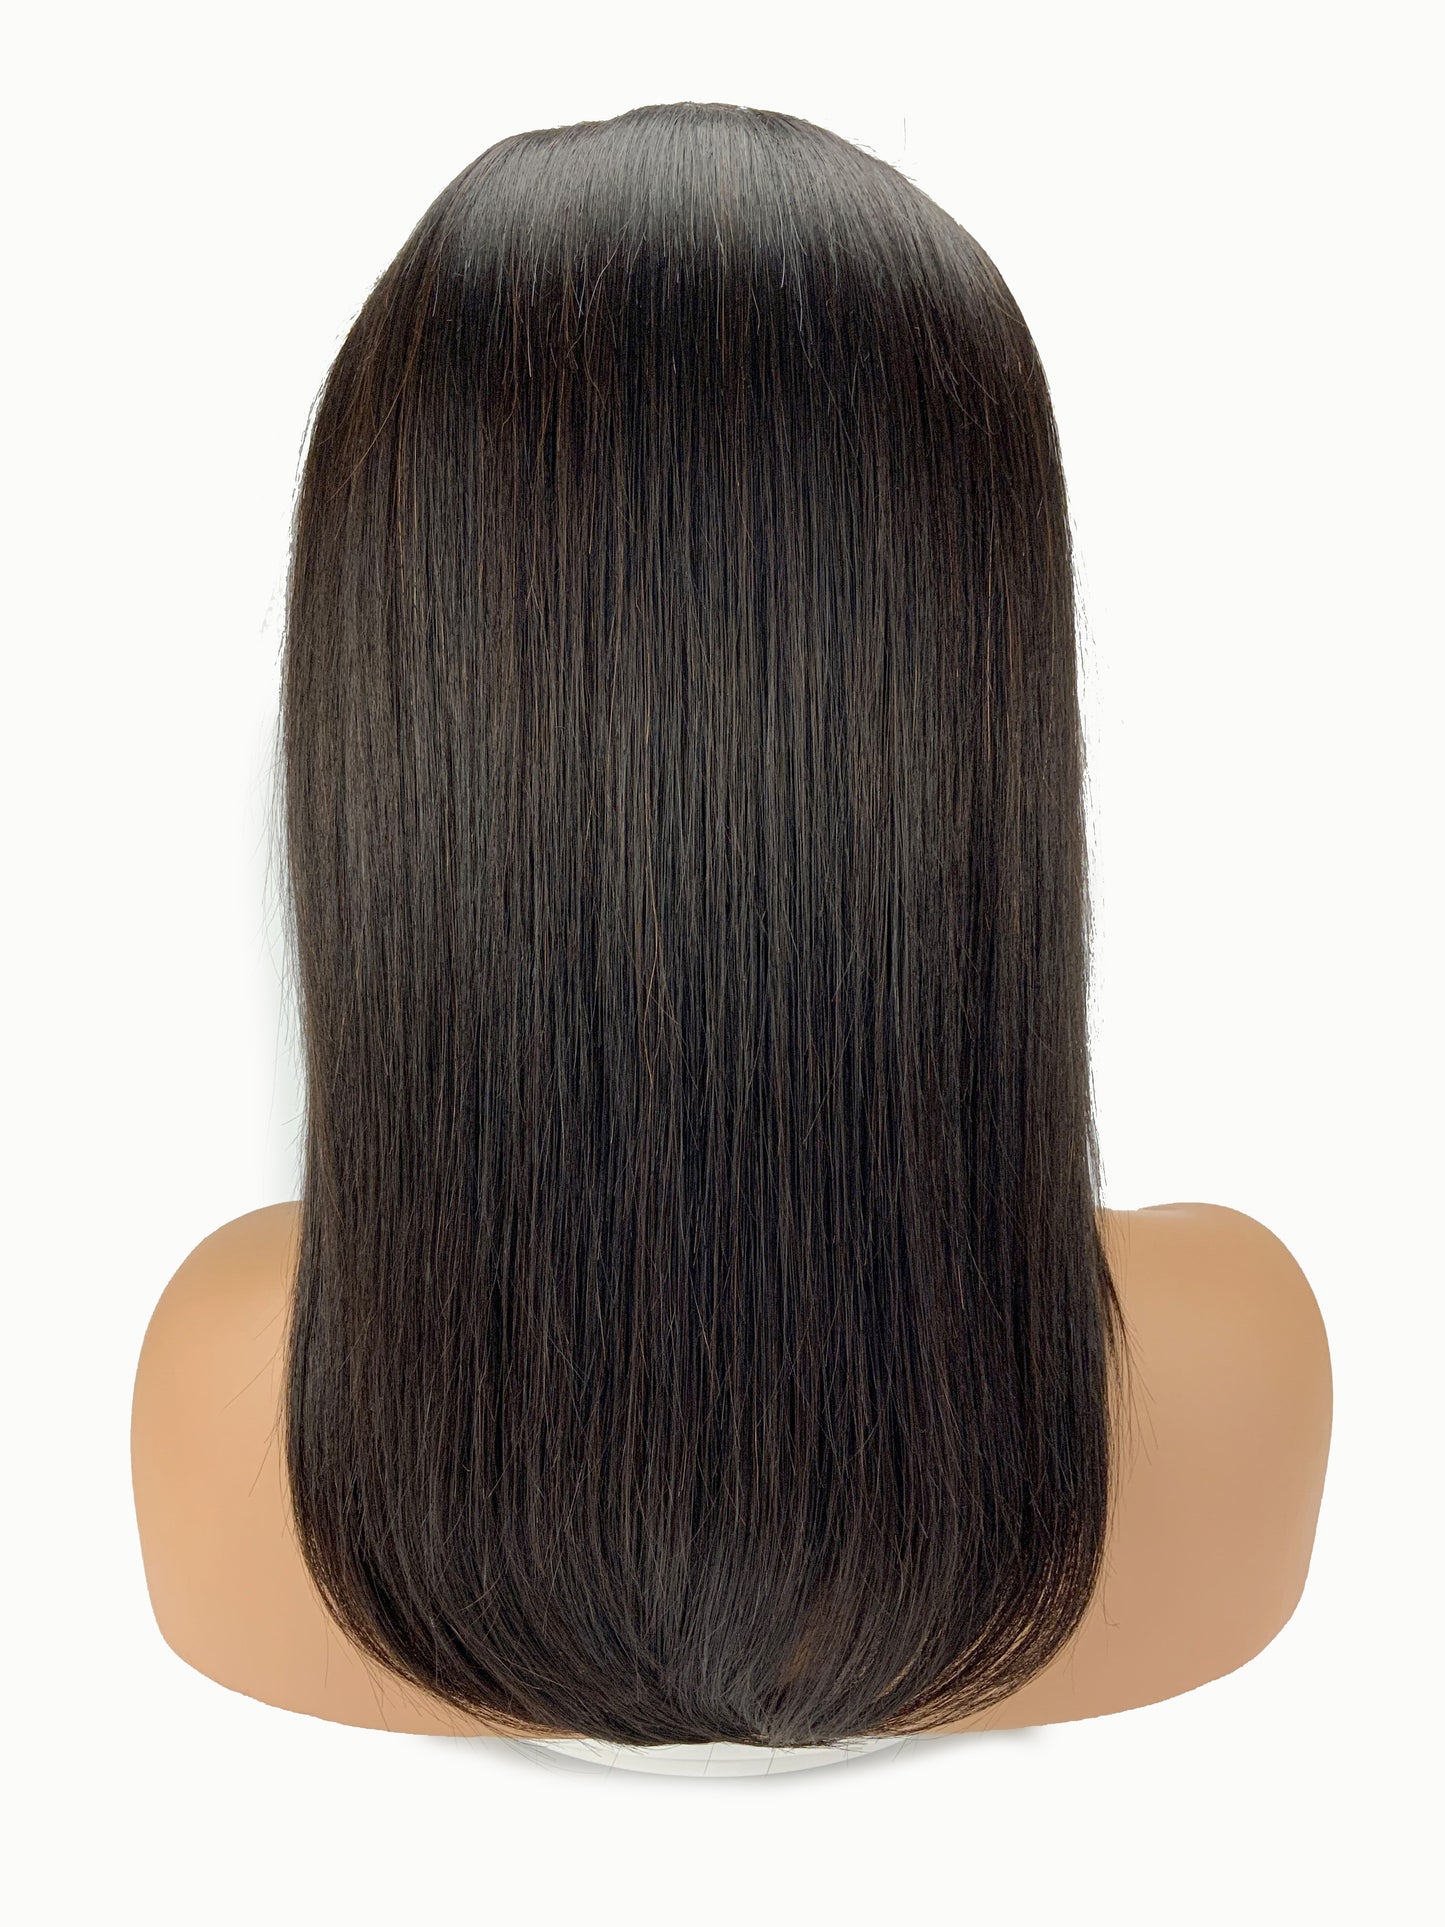 Cheap Wholesale Wigs Raw Indian Virgin Human Hair Full Lace Front Closure Wigs For Black Women Lace Frontal Wigs Human Hair